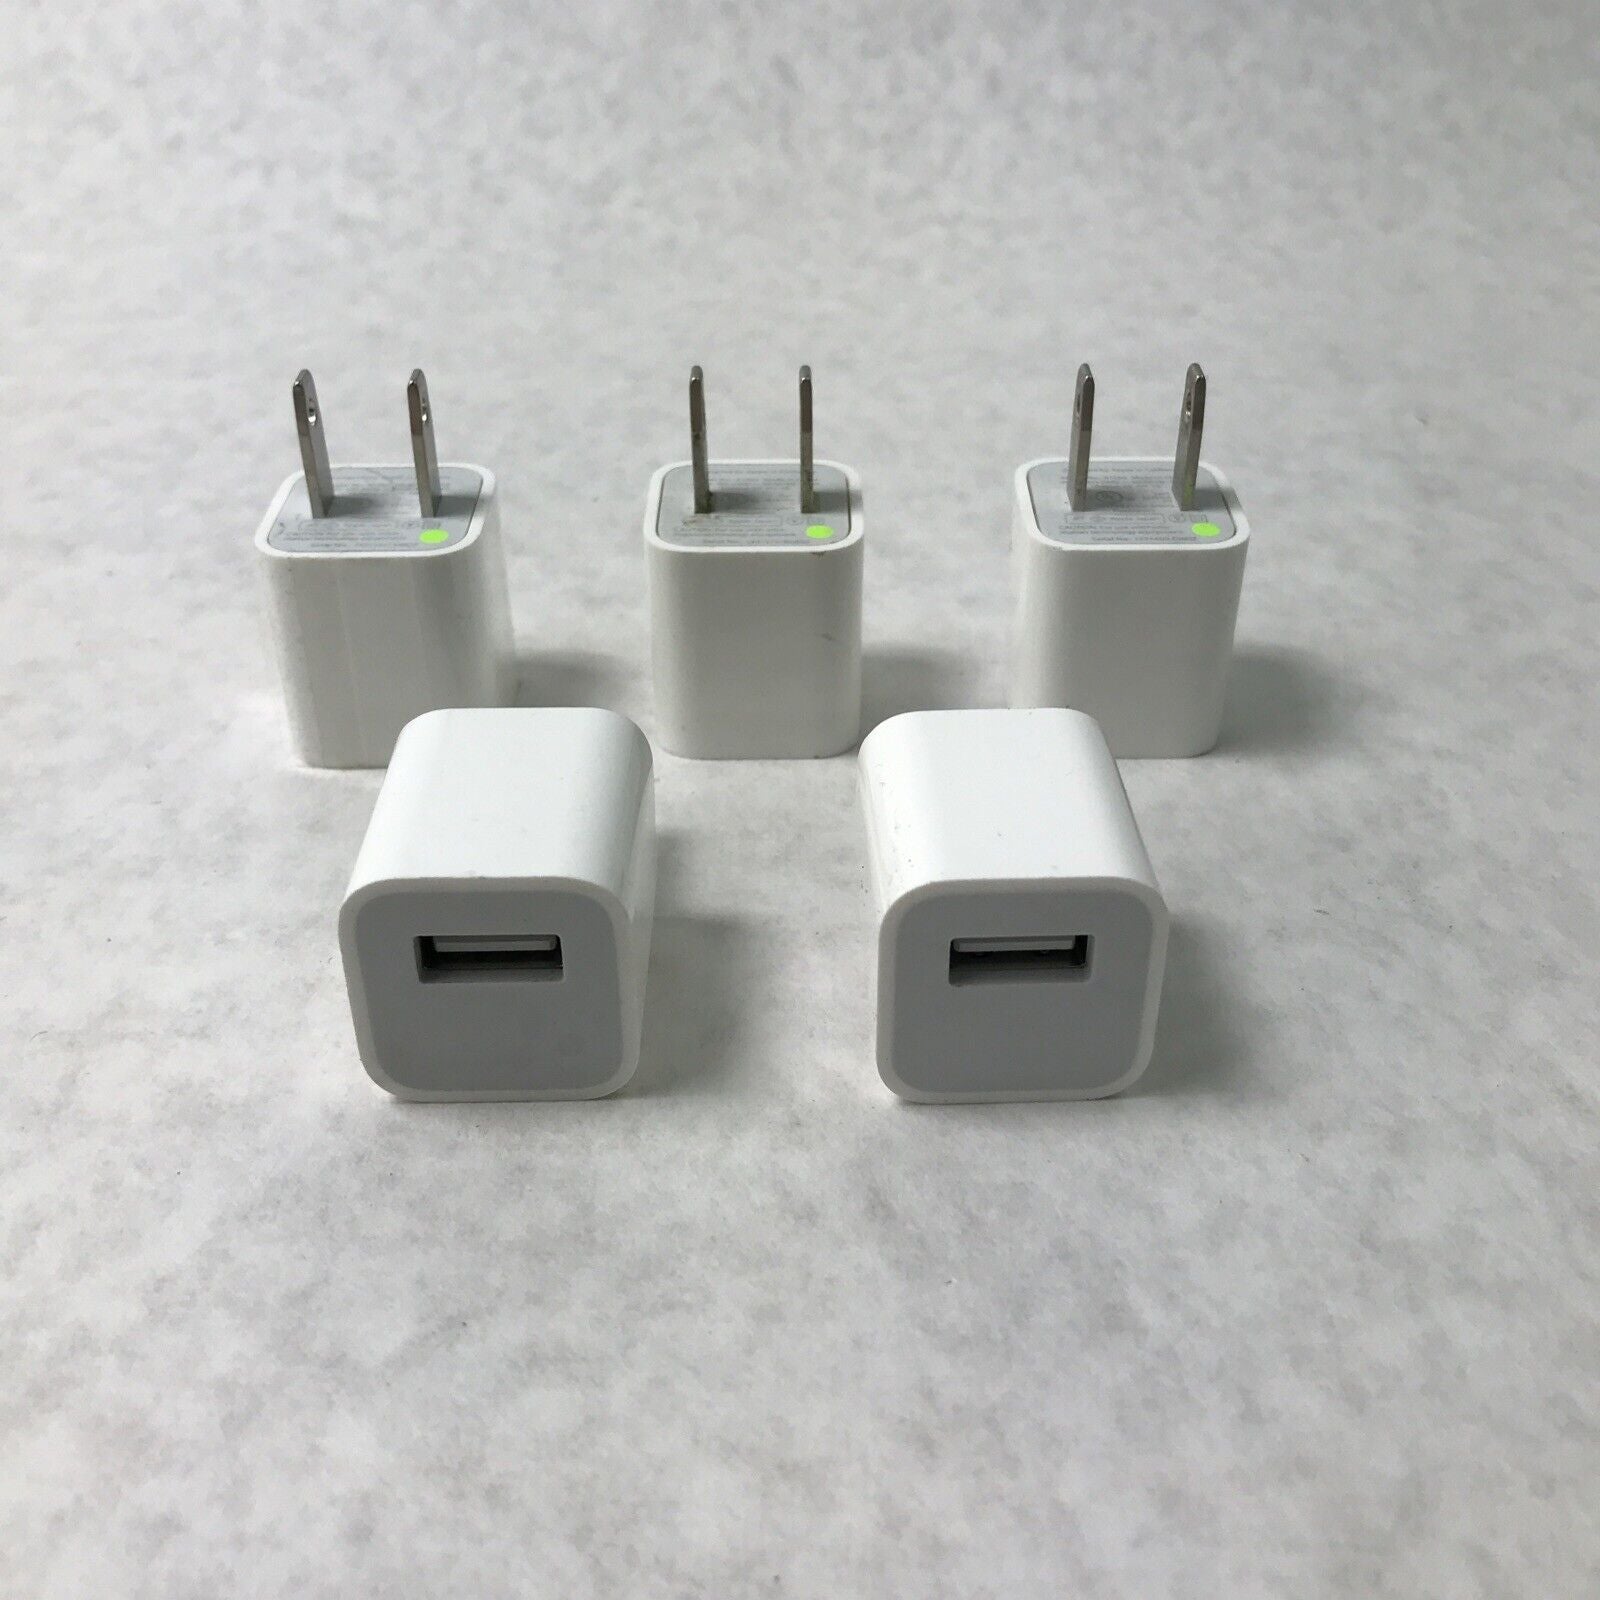 (Lot of 5) Genuine Apple Power Adapter Standard Outlet to USB 240V 60Hz 1A